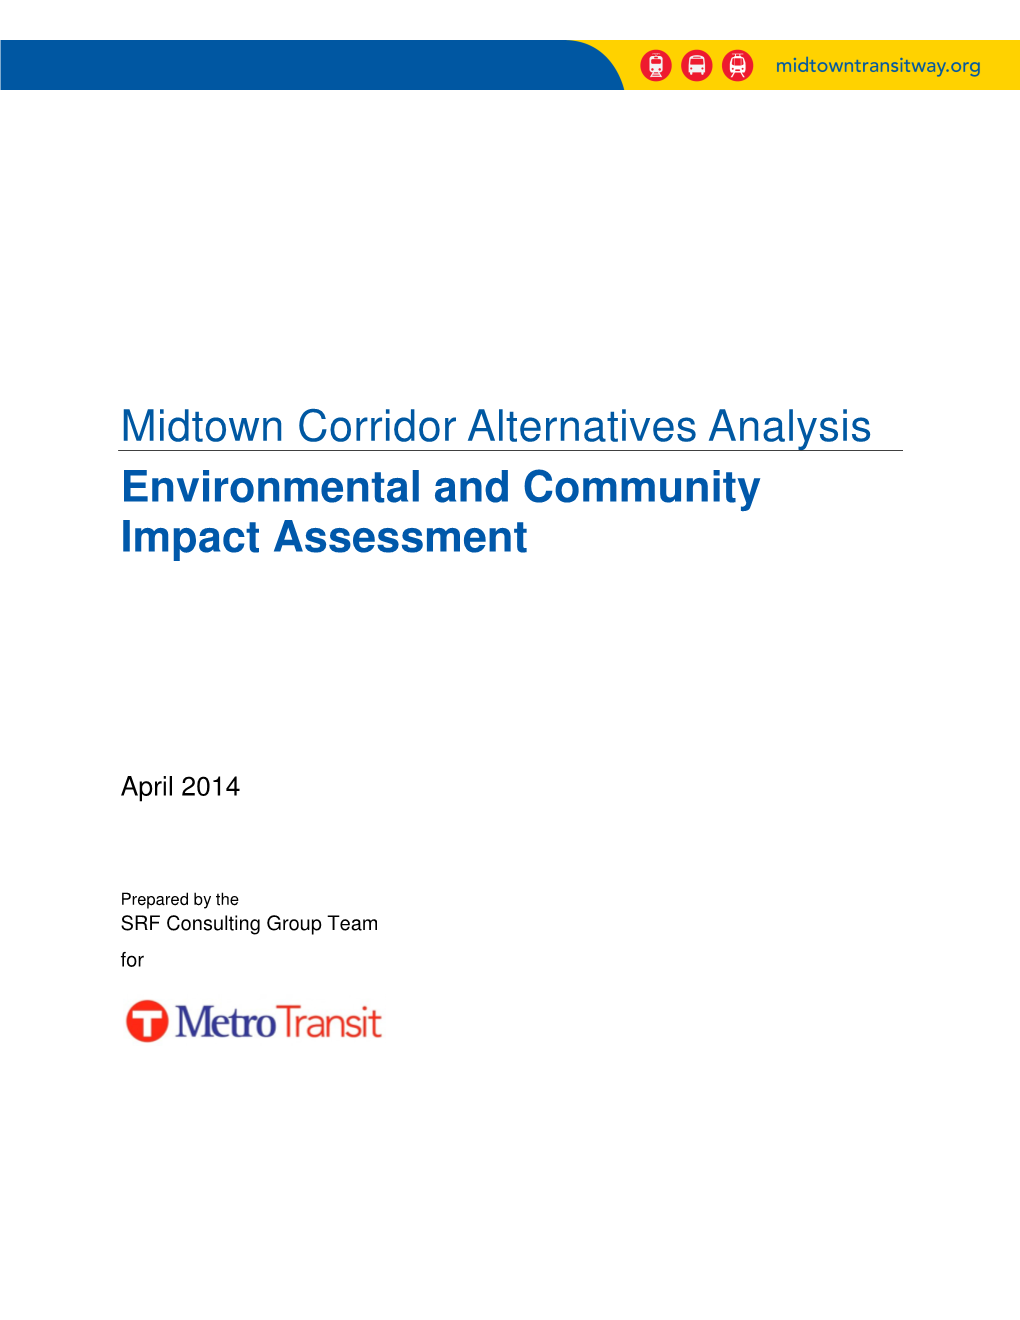 Community and Environmental Impact Assessment